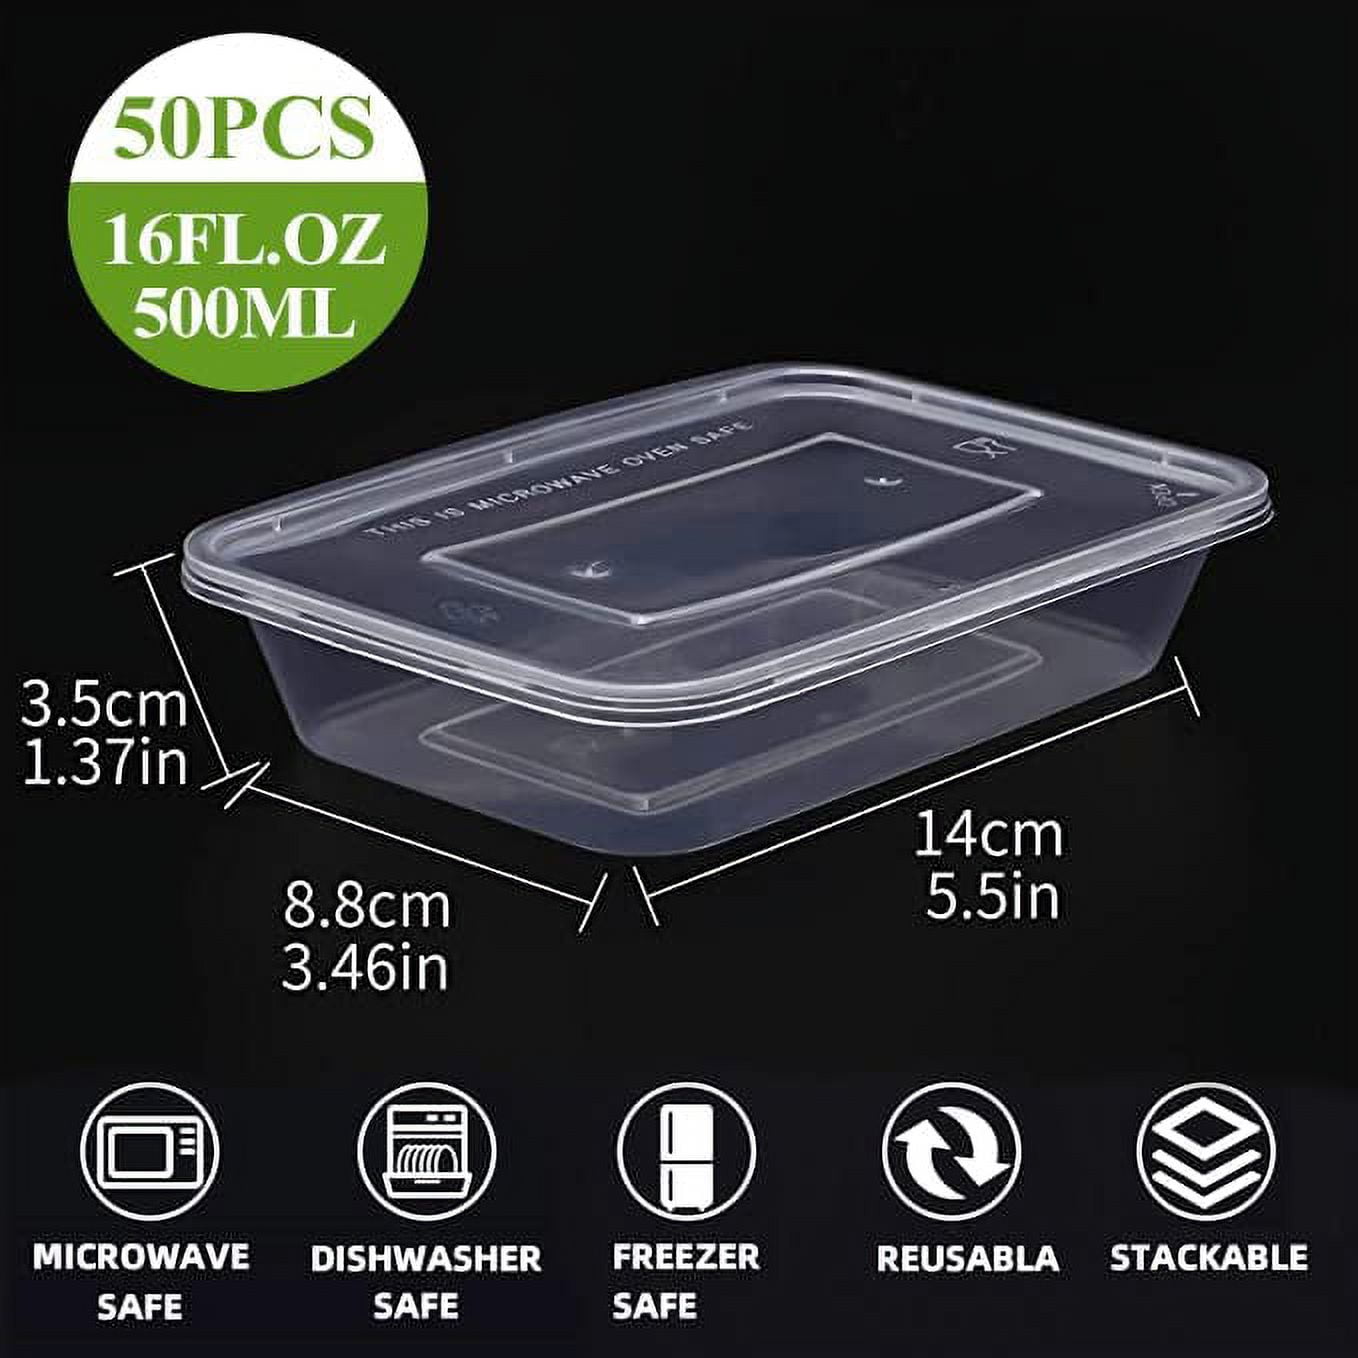 650ml Clear Takeaway Food Containers & Lids (case of 300)